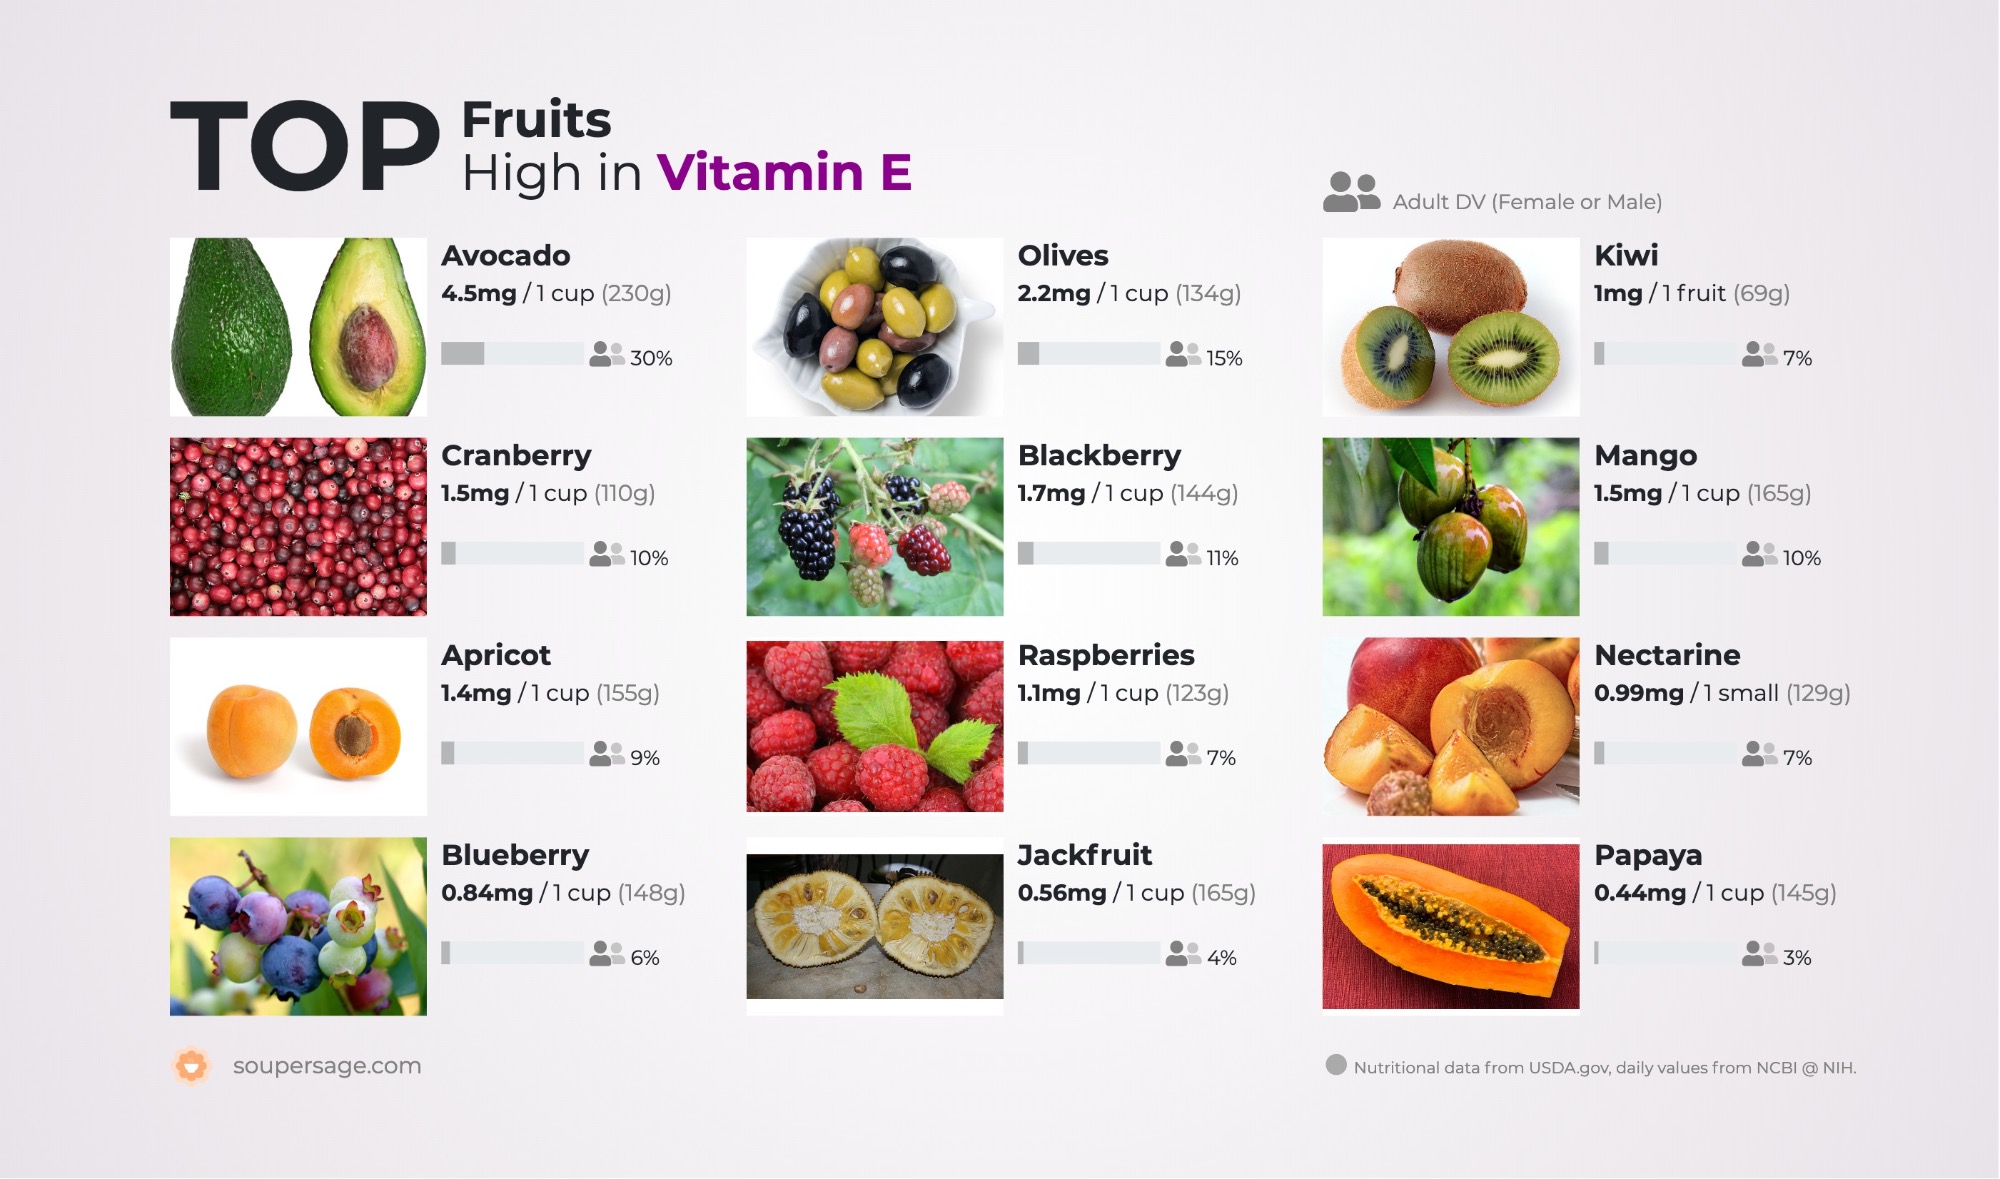 image of Top Fruits High in Vitamin E